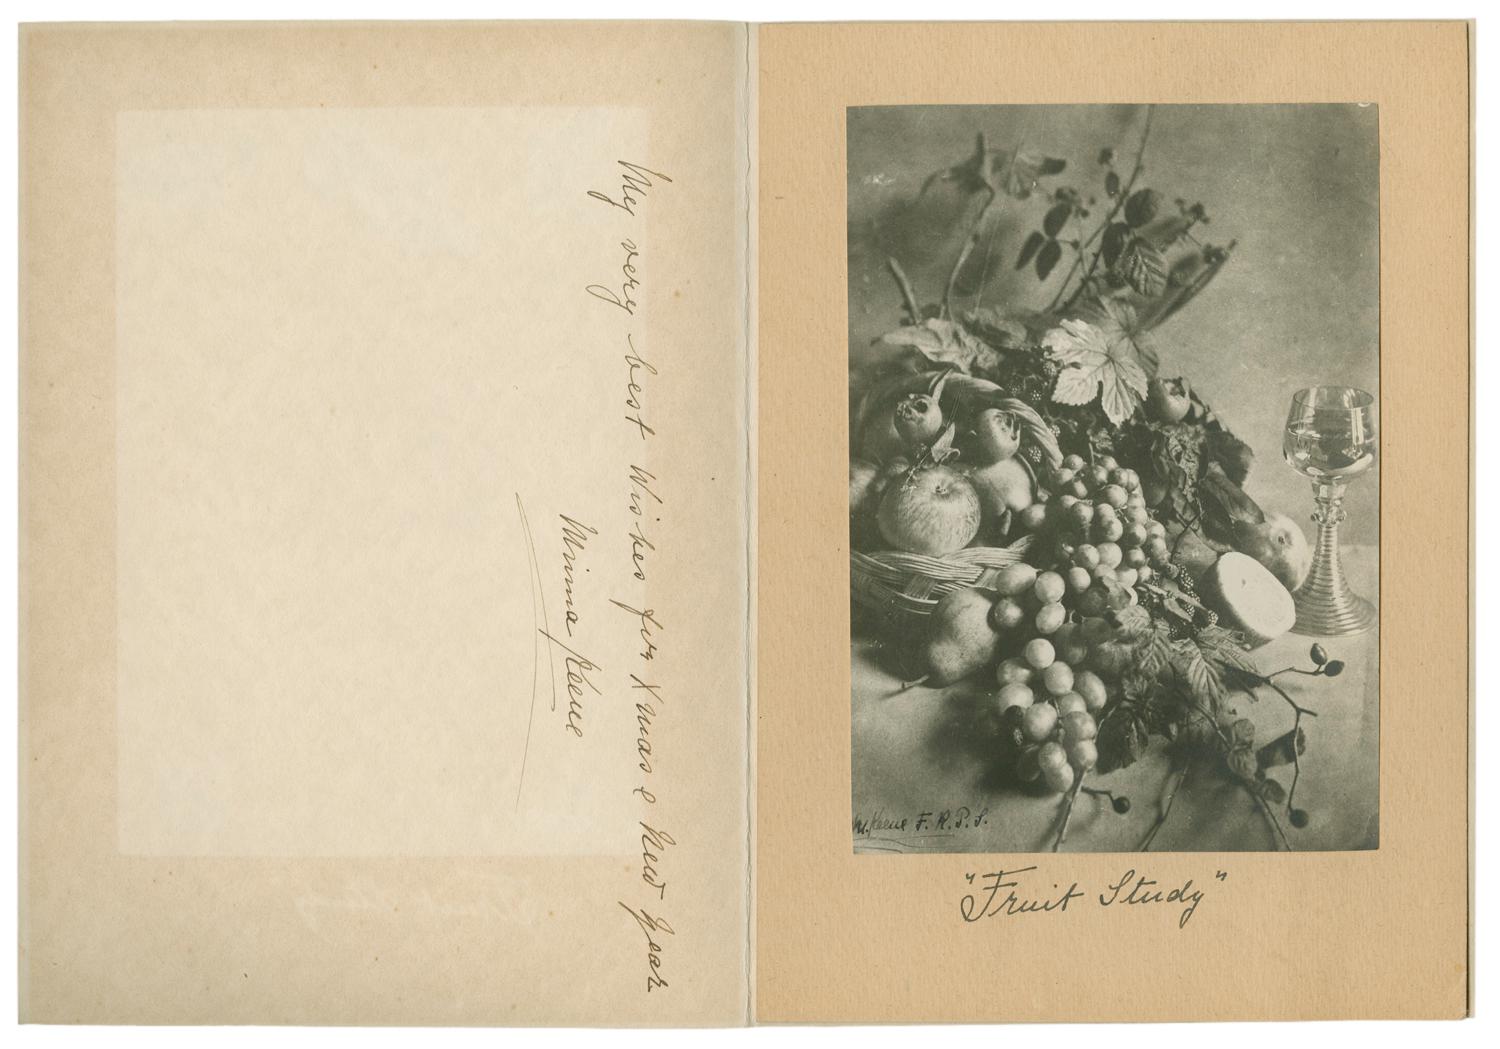 A bundle of fruits with an empty wine glass sitting beside them. Mounted on beige paper with the words “fruit study” written underneath. Black and white photograph by Minna Keene.